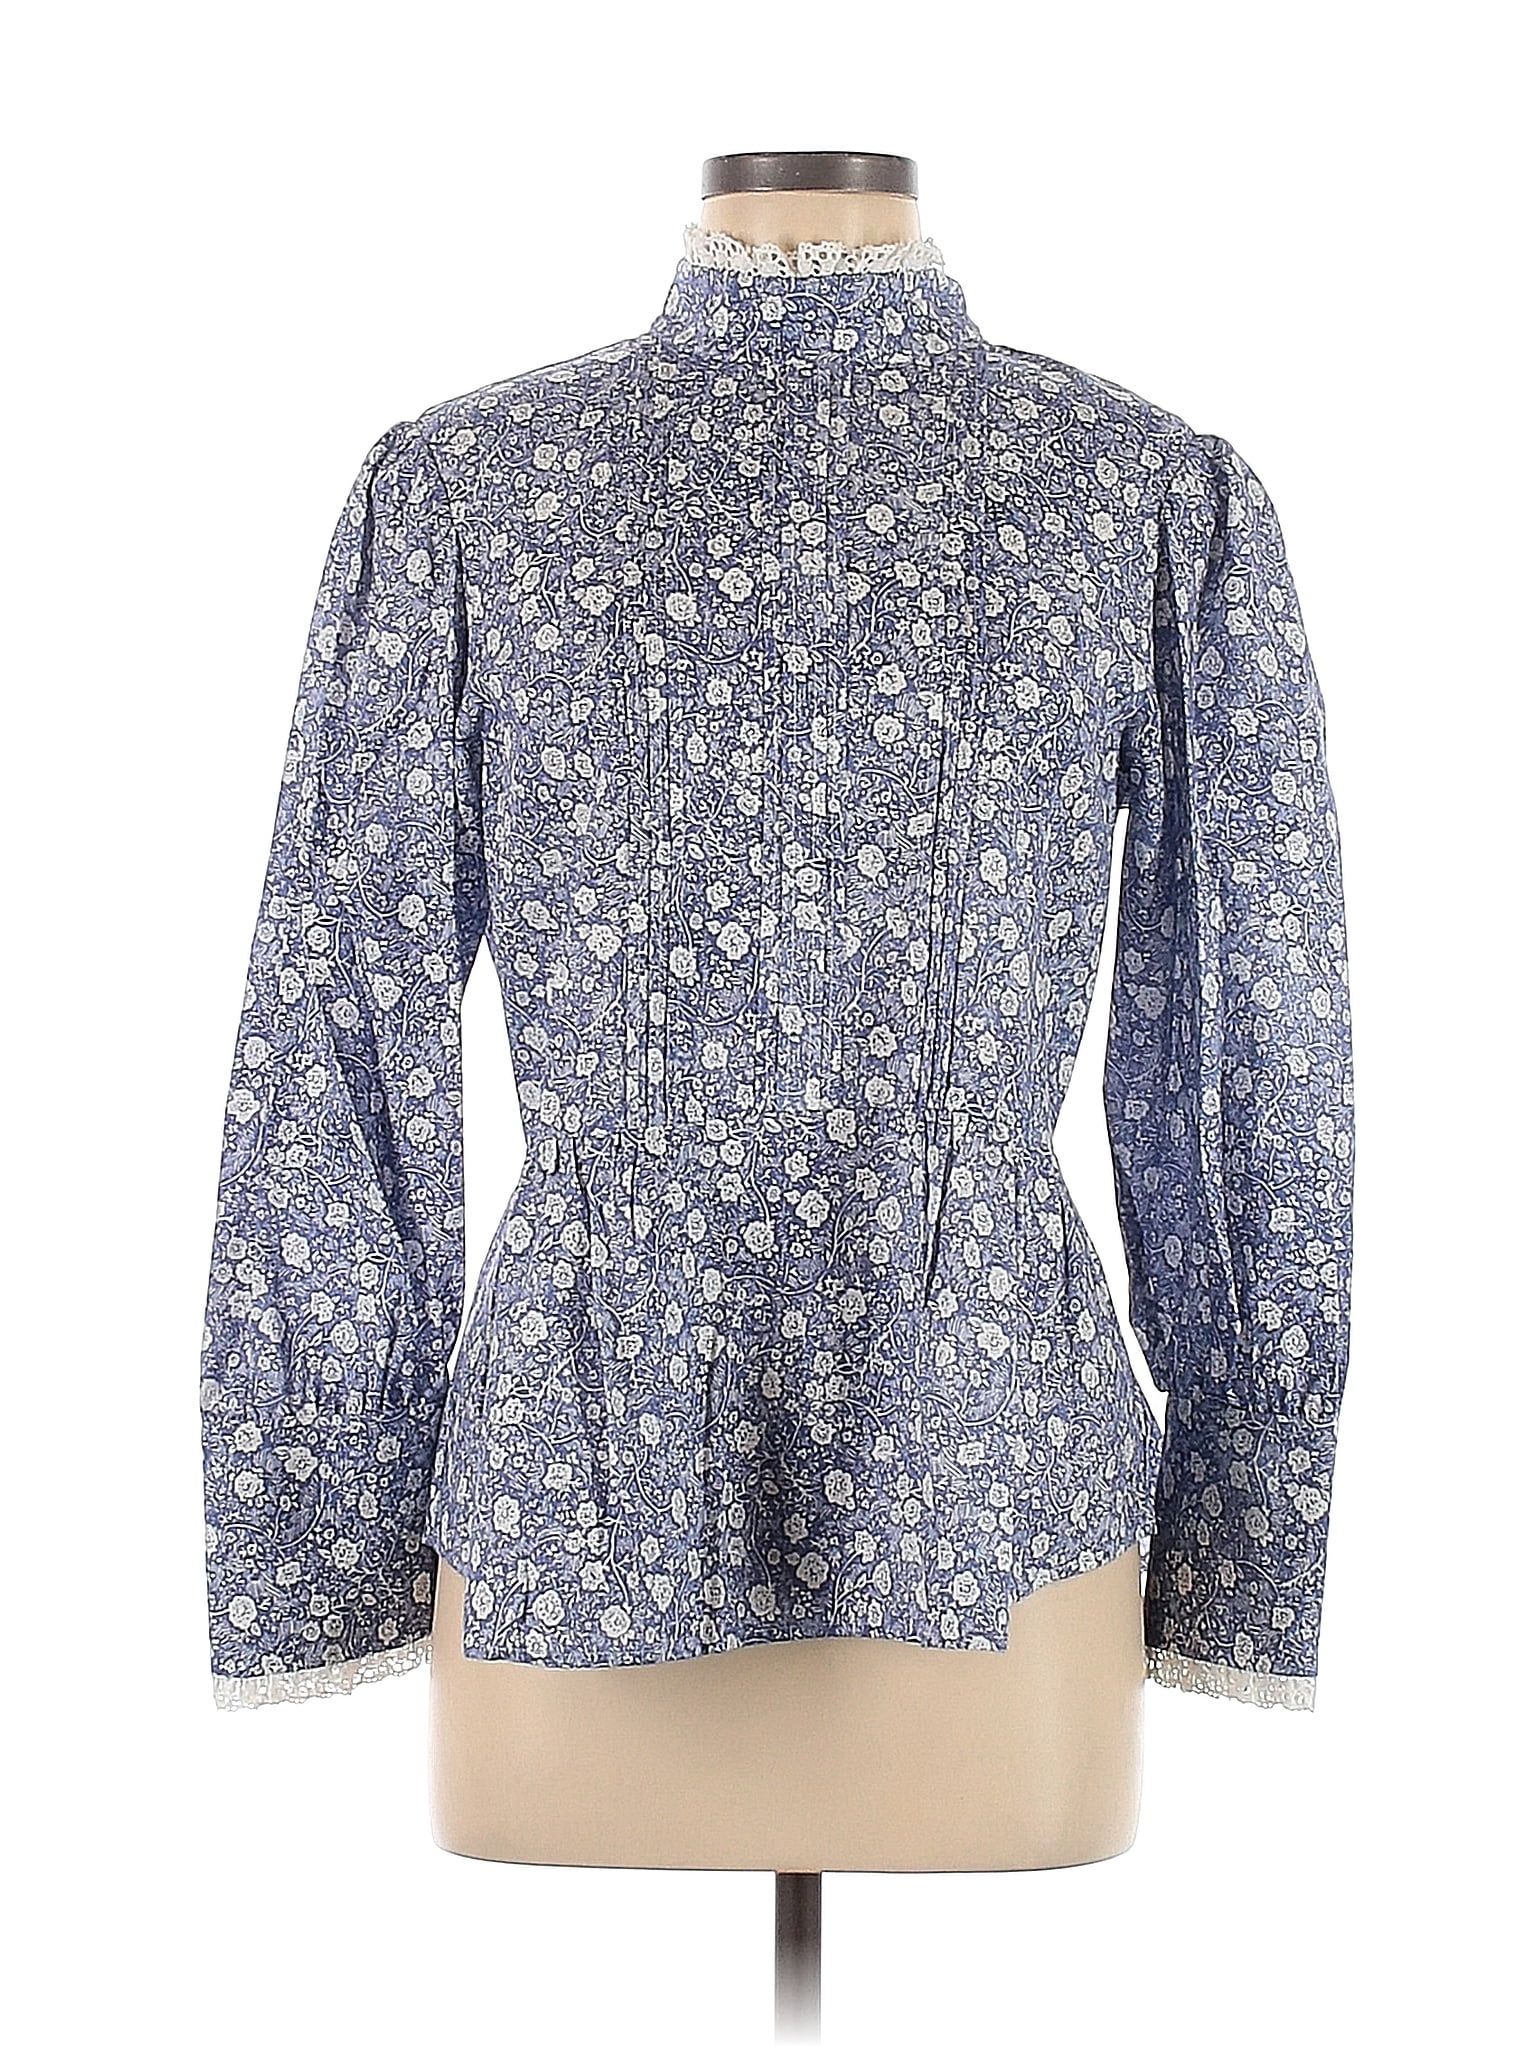 See By Chloé Floral Blue Long Sleeve Blouse Size 40 (FR) - 56% off ...